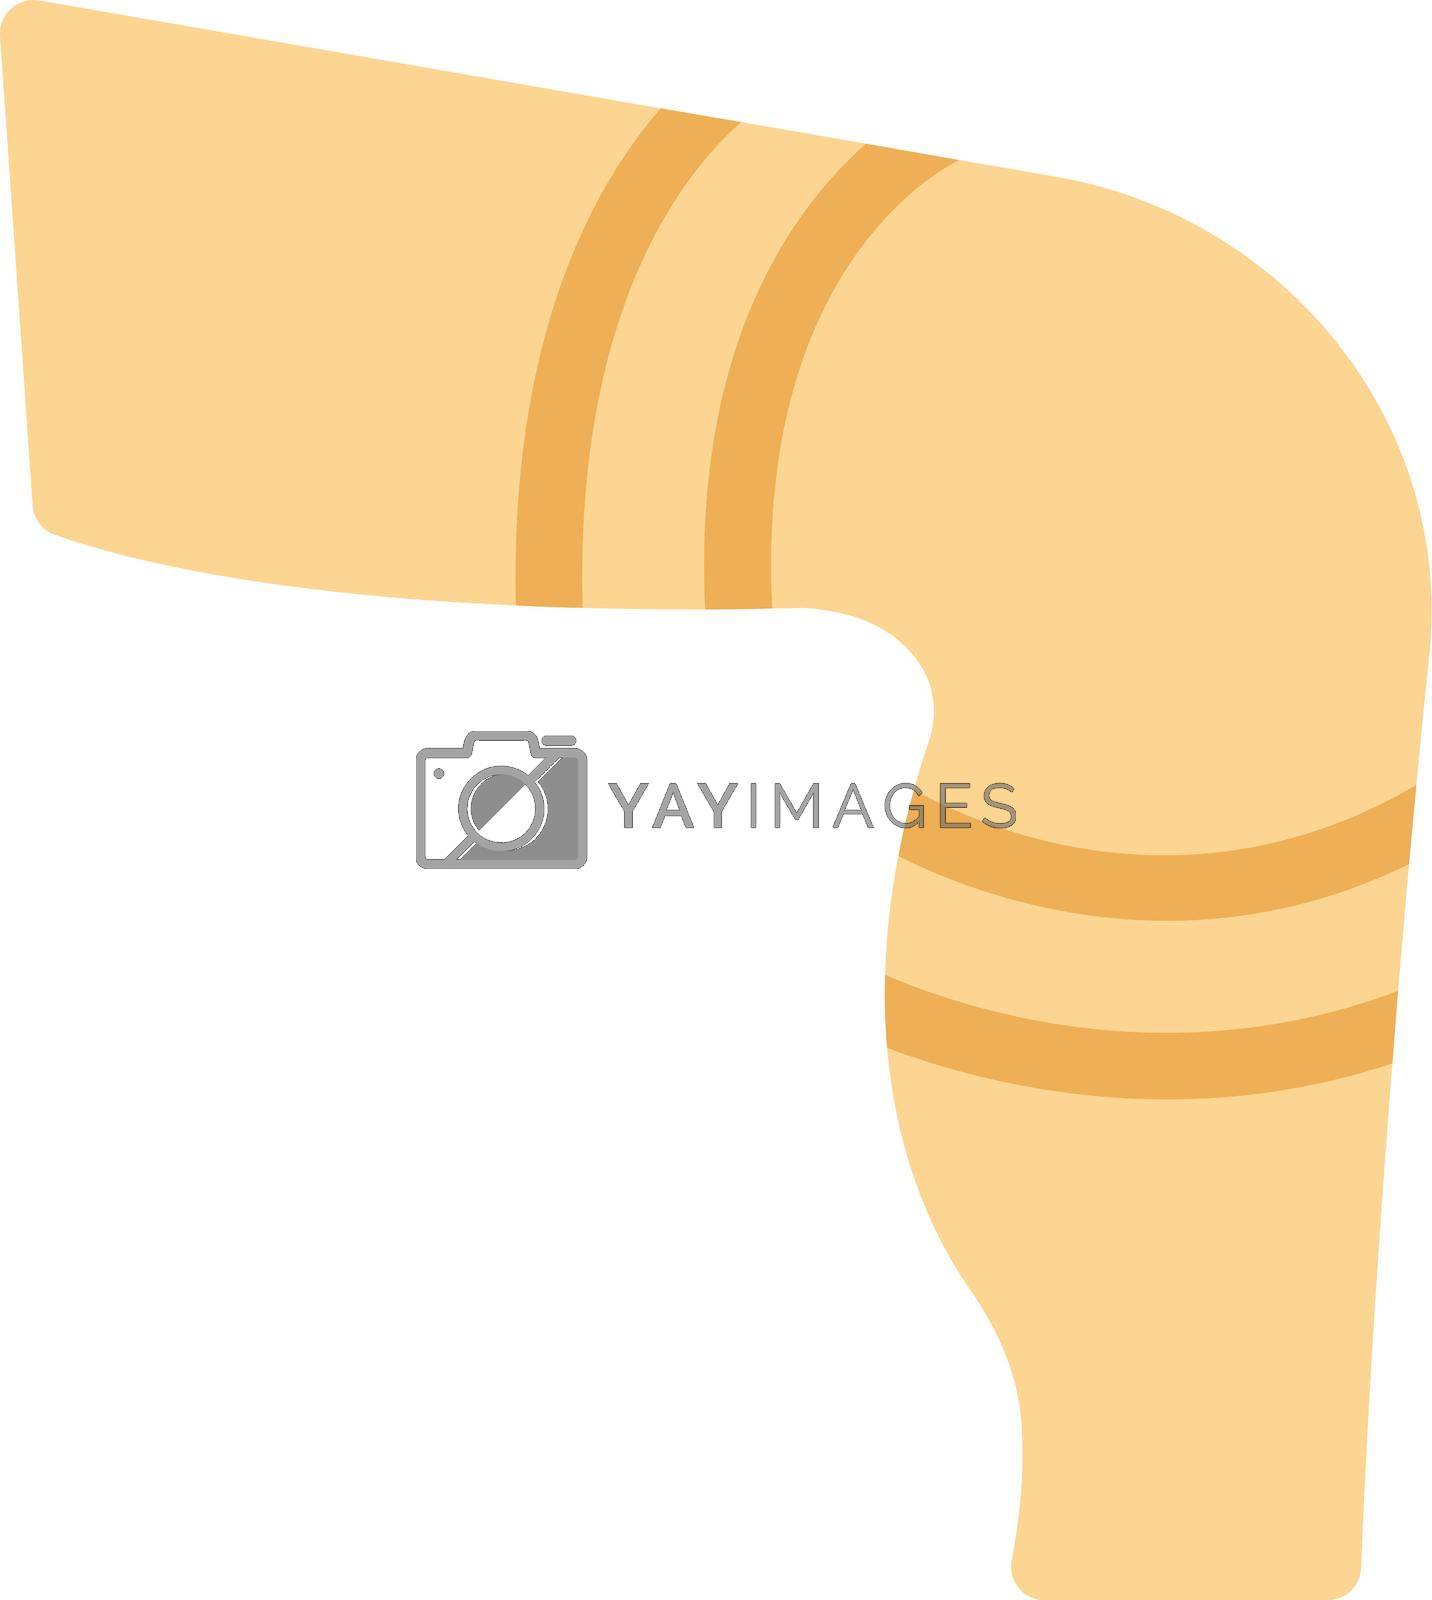 Royalty free image of leg by vectorstall